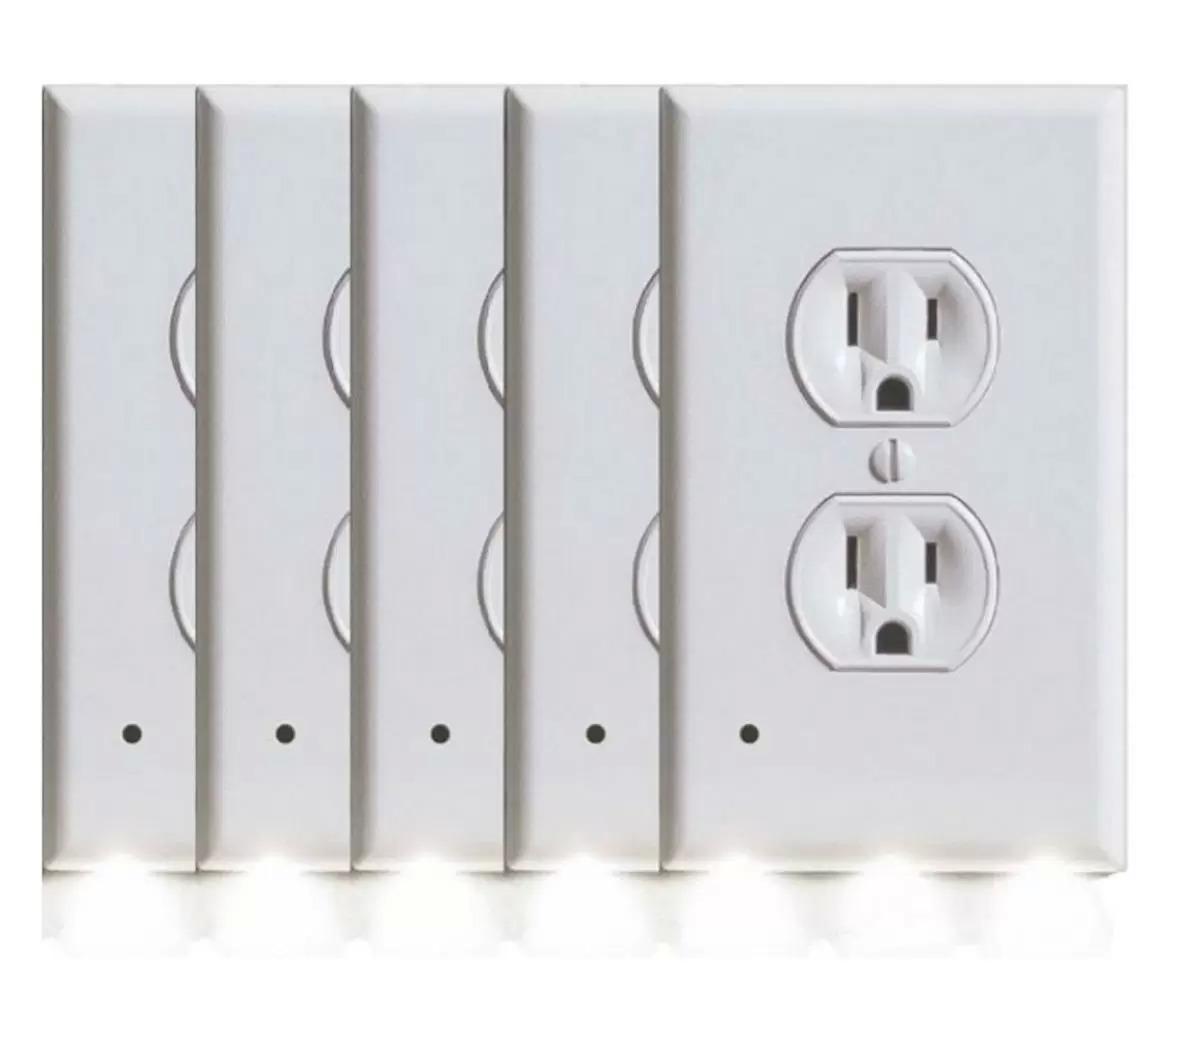 BH Outlet Covers with Built-In LED Night Light 5 Pack for $14.99